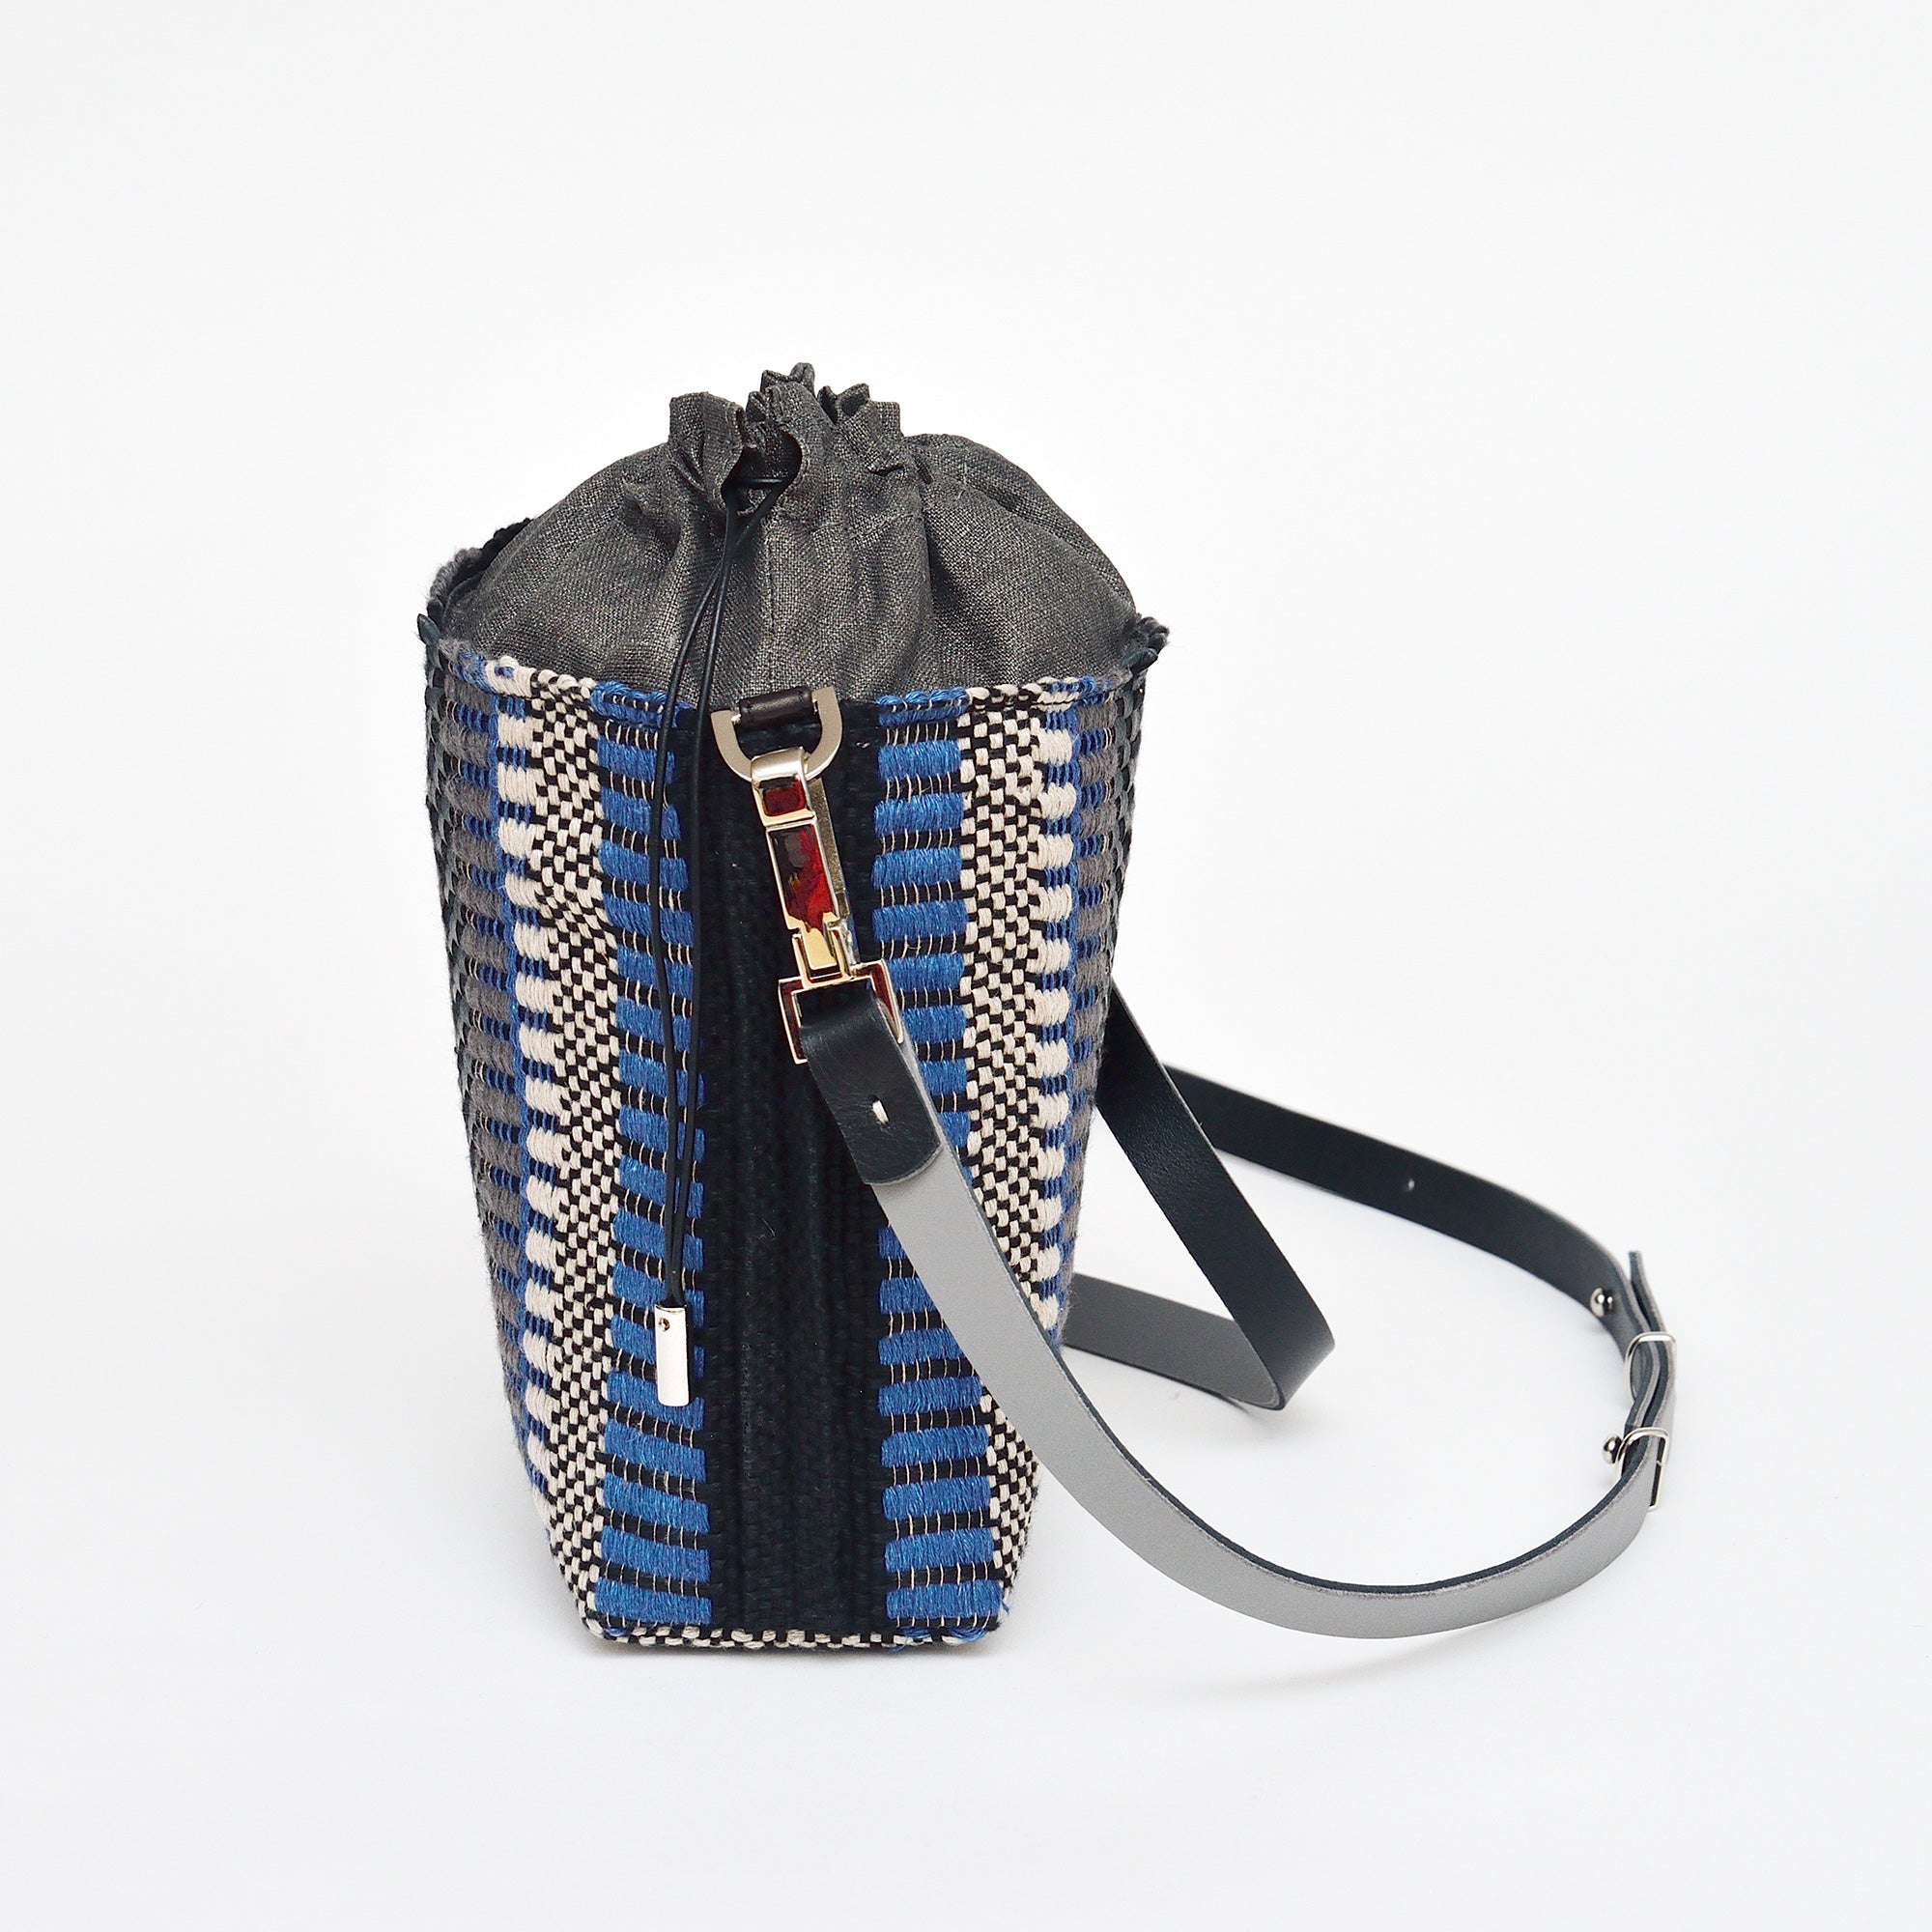 Handwoven Bag AUSTĖ #40 blue/silver linen and leather